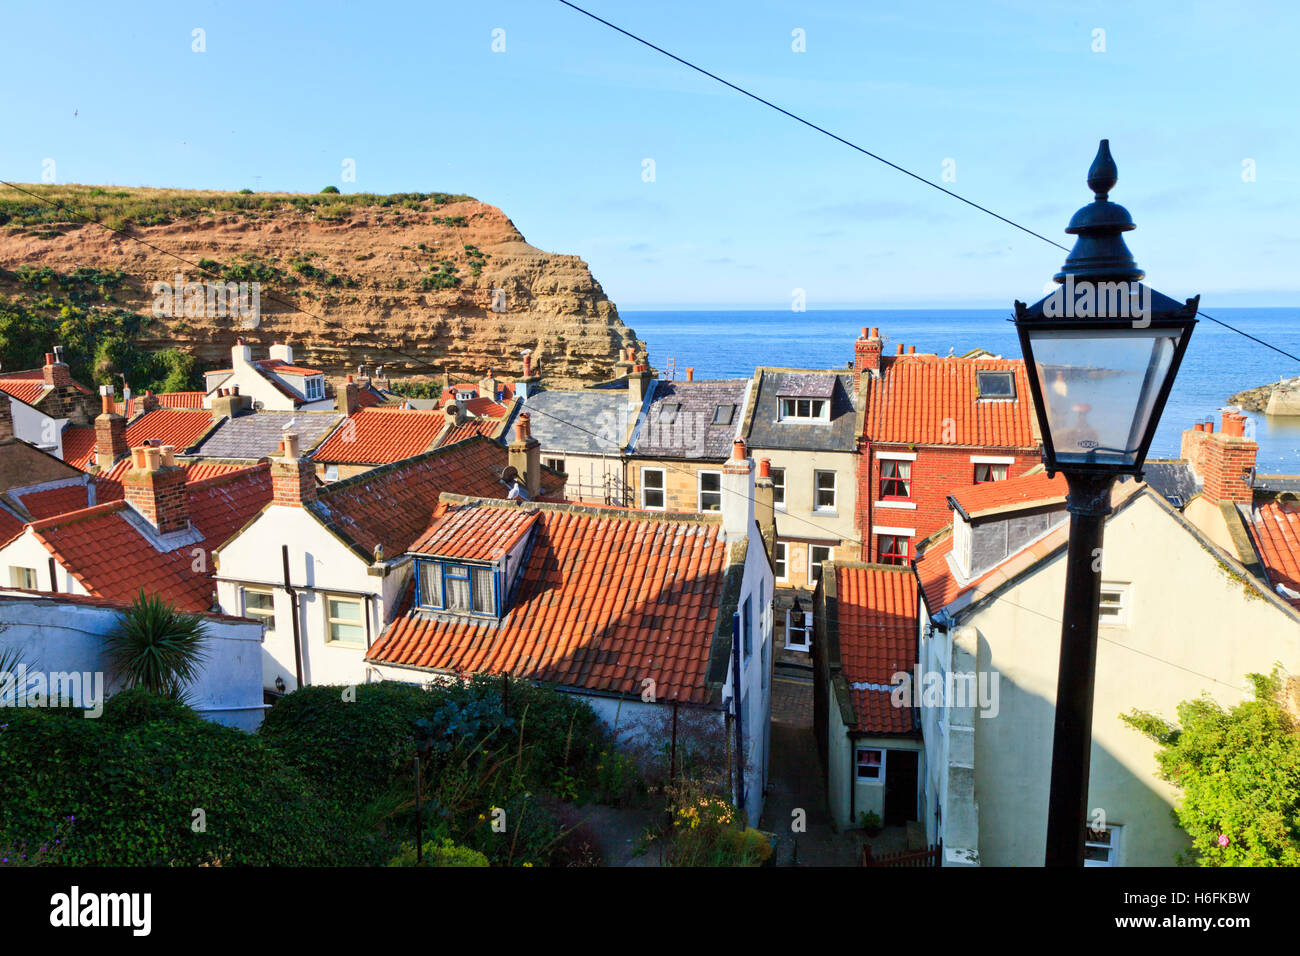 Staithes Yorkshire Coast, England UK Banque D'Images